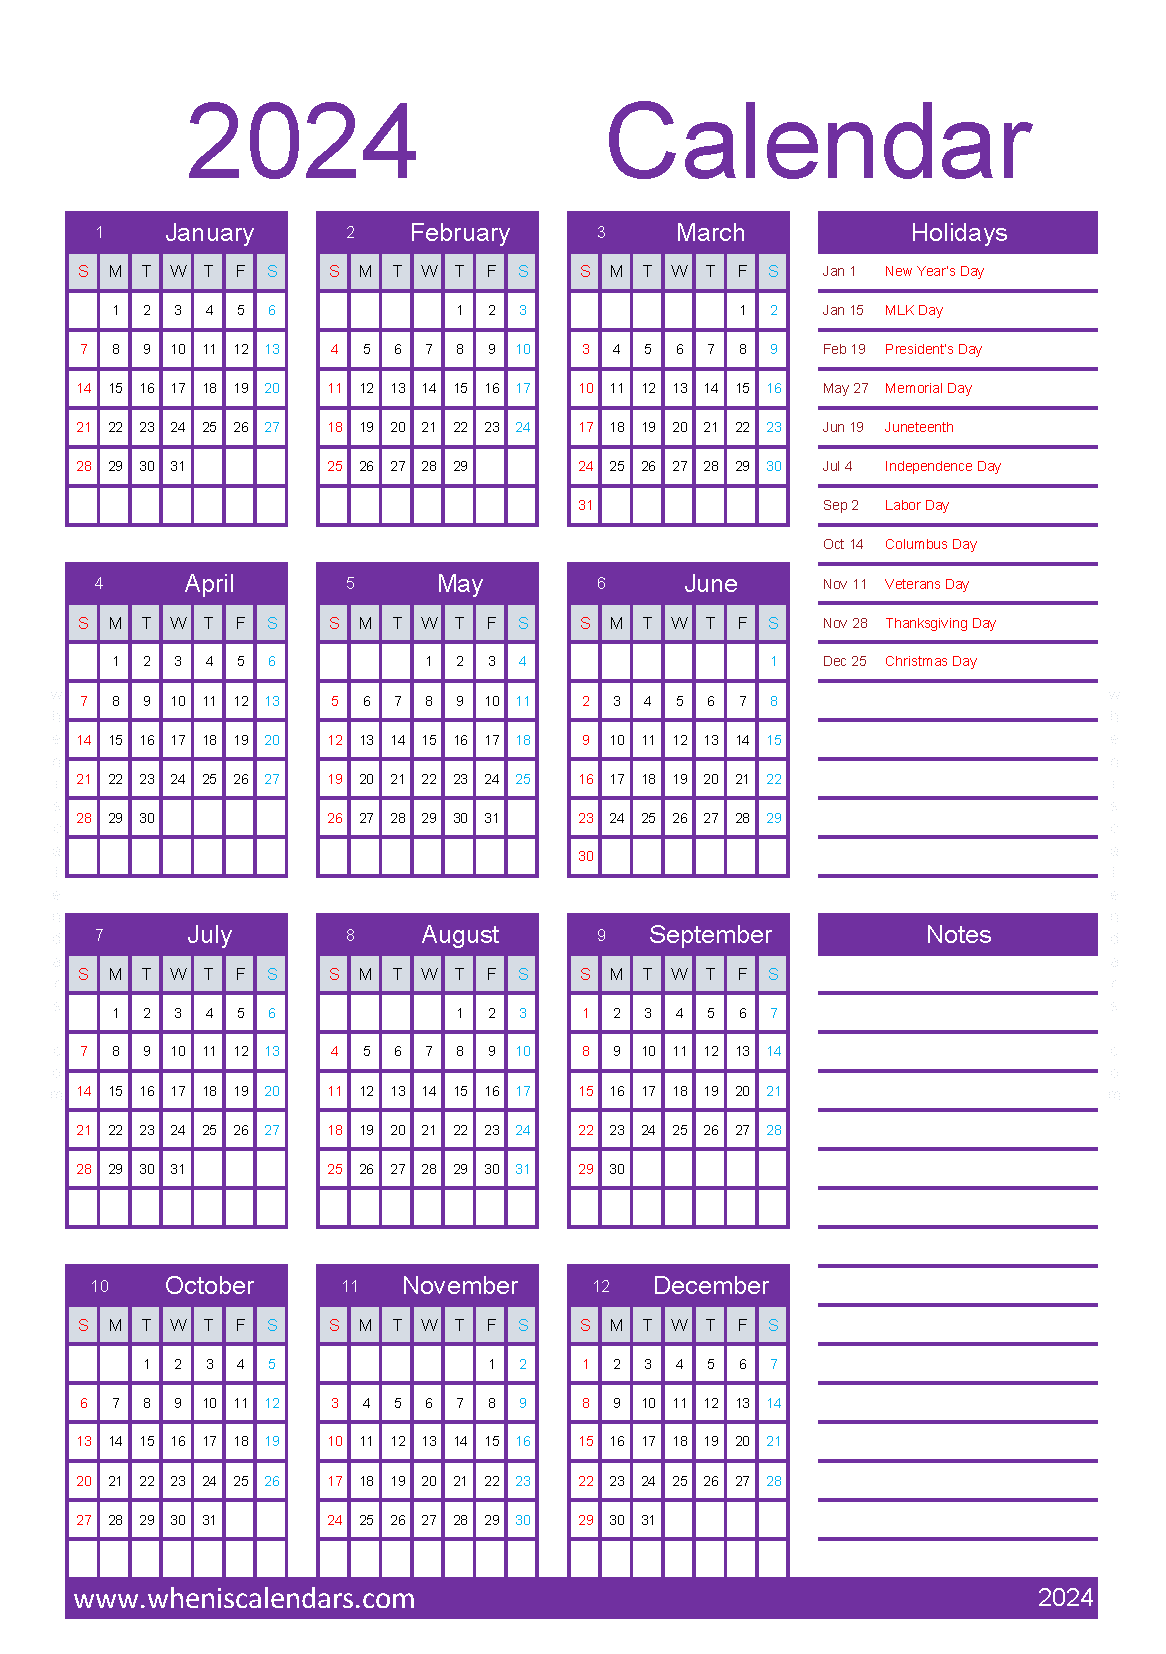 Download Free printable 2024 Calendar with Holidays A5 in vertical portrait